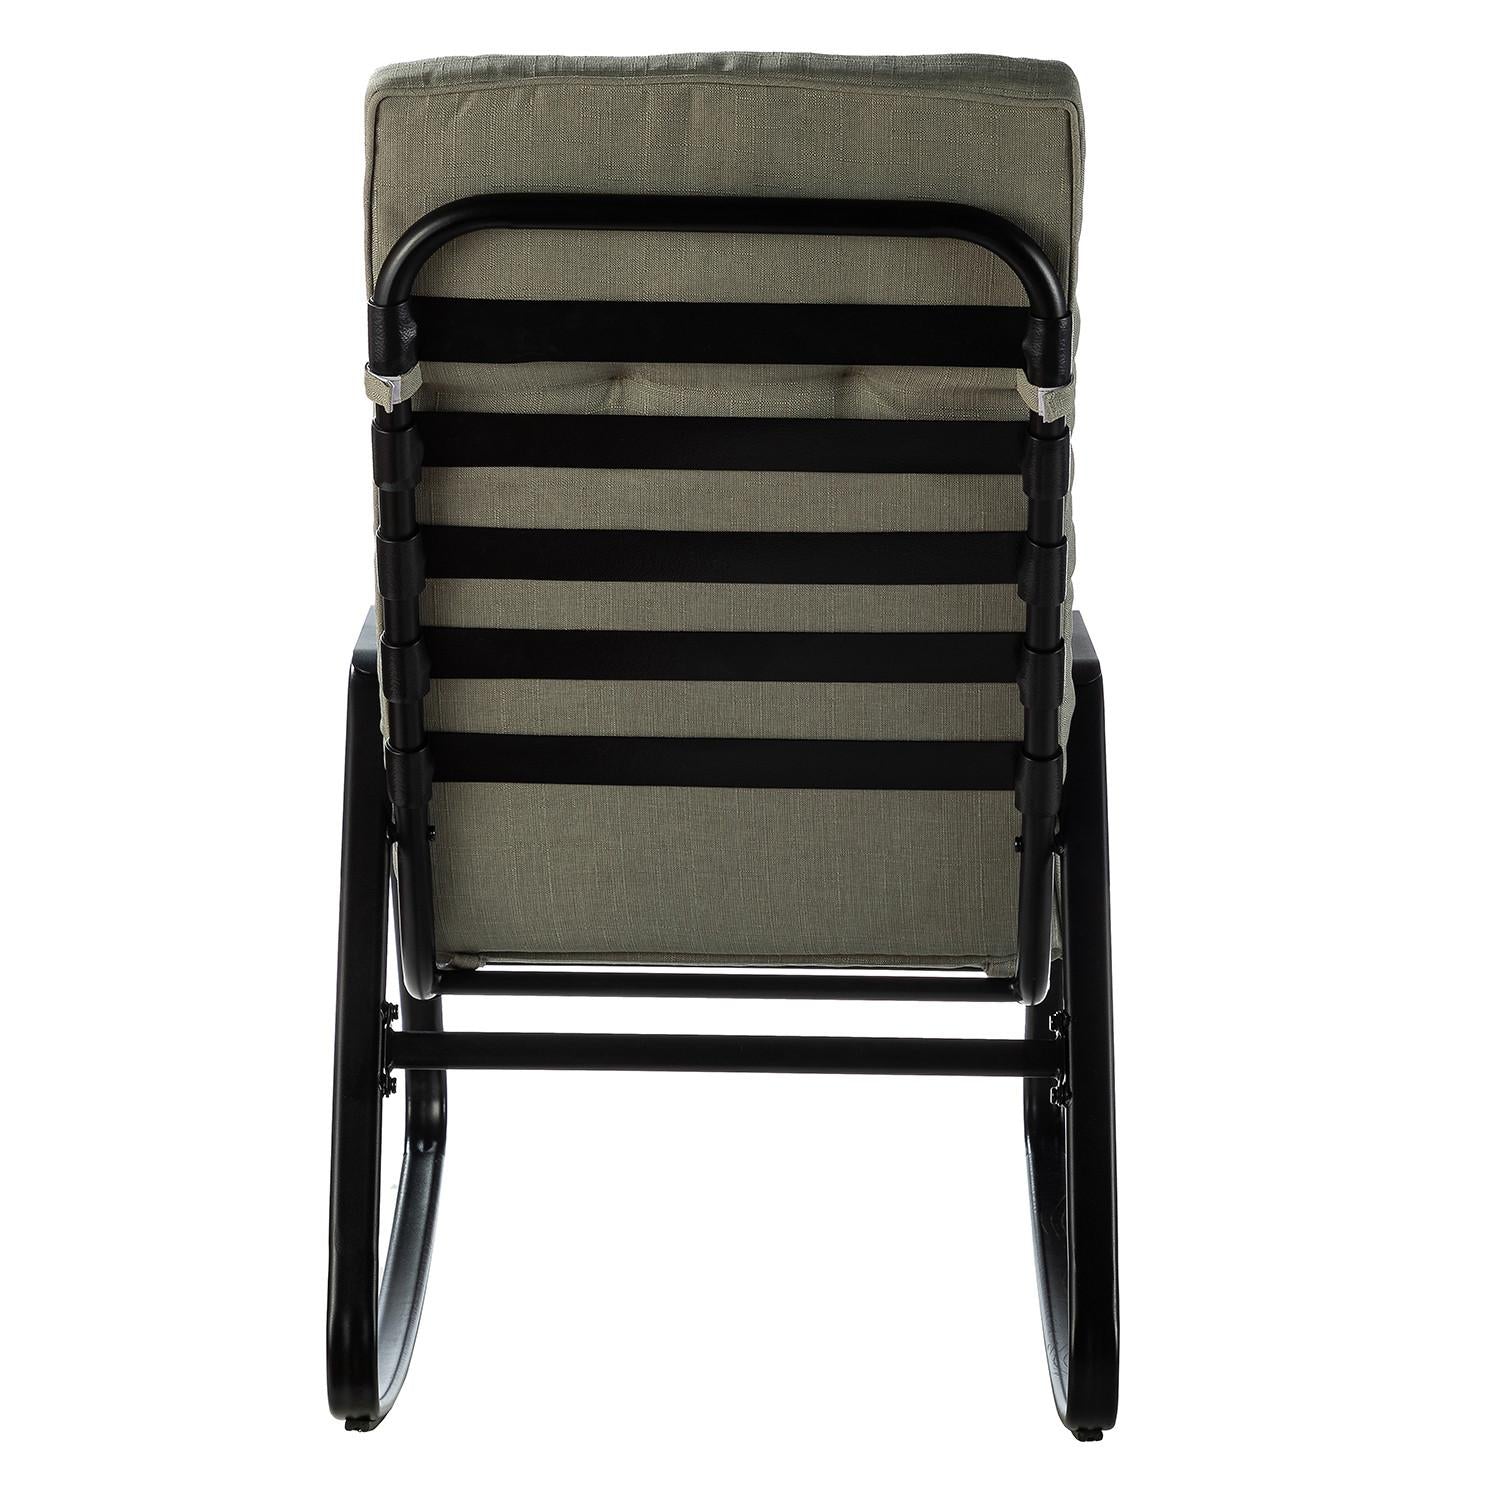 Dark Grey Outdoor Rocking Chair and Table Set